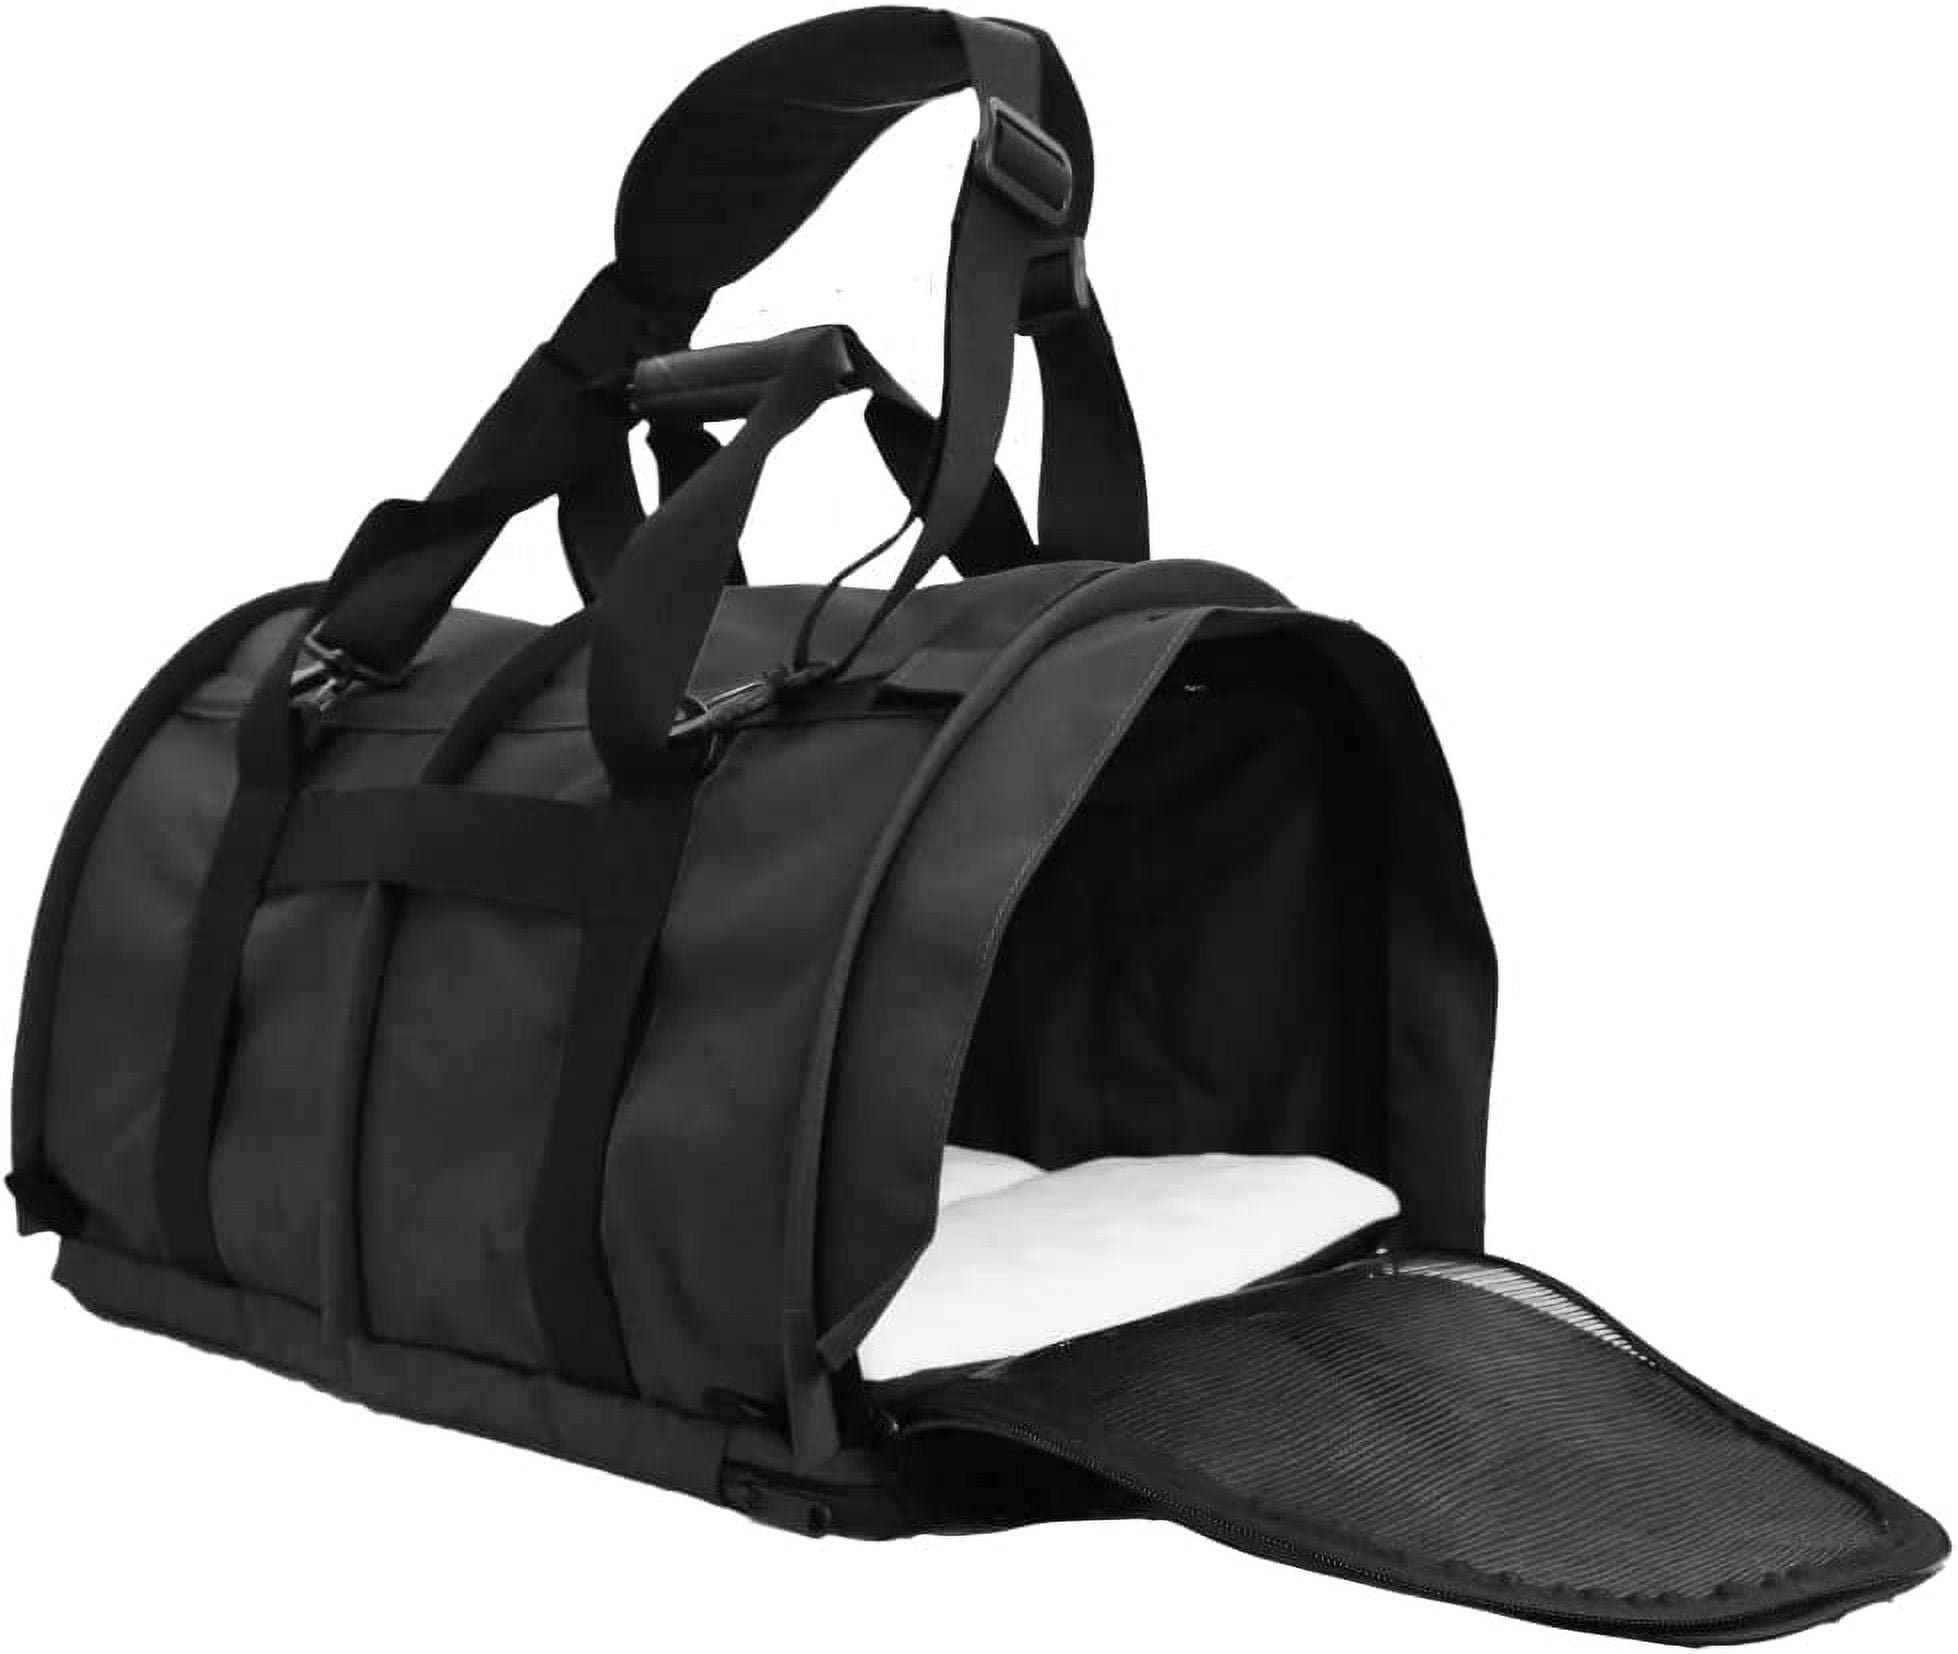 SturdiBag™ Pro 2.0 Size Large Pet Carrier with Heavy Mesh- Black only